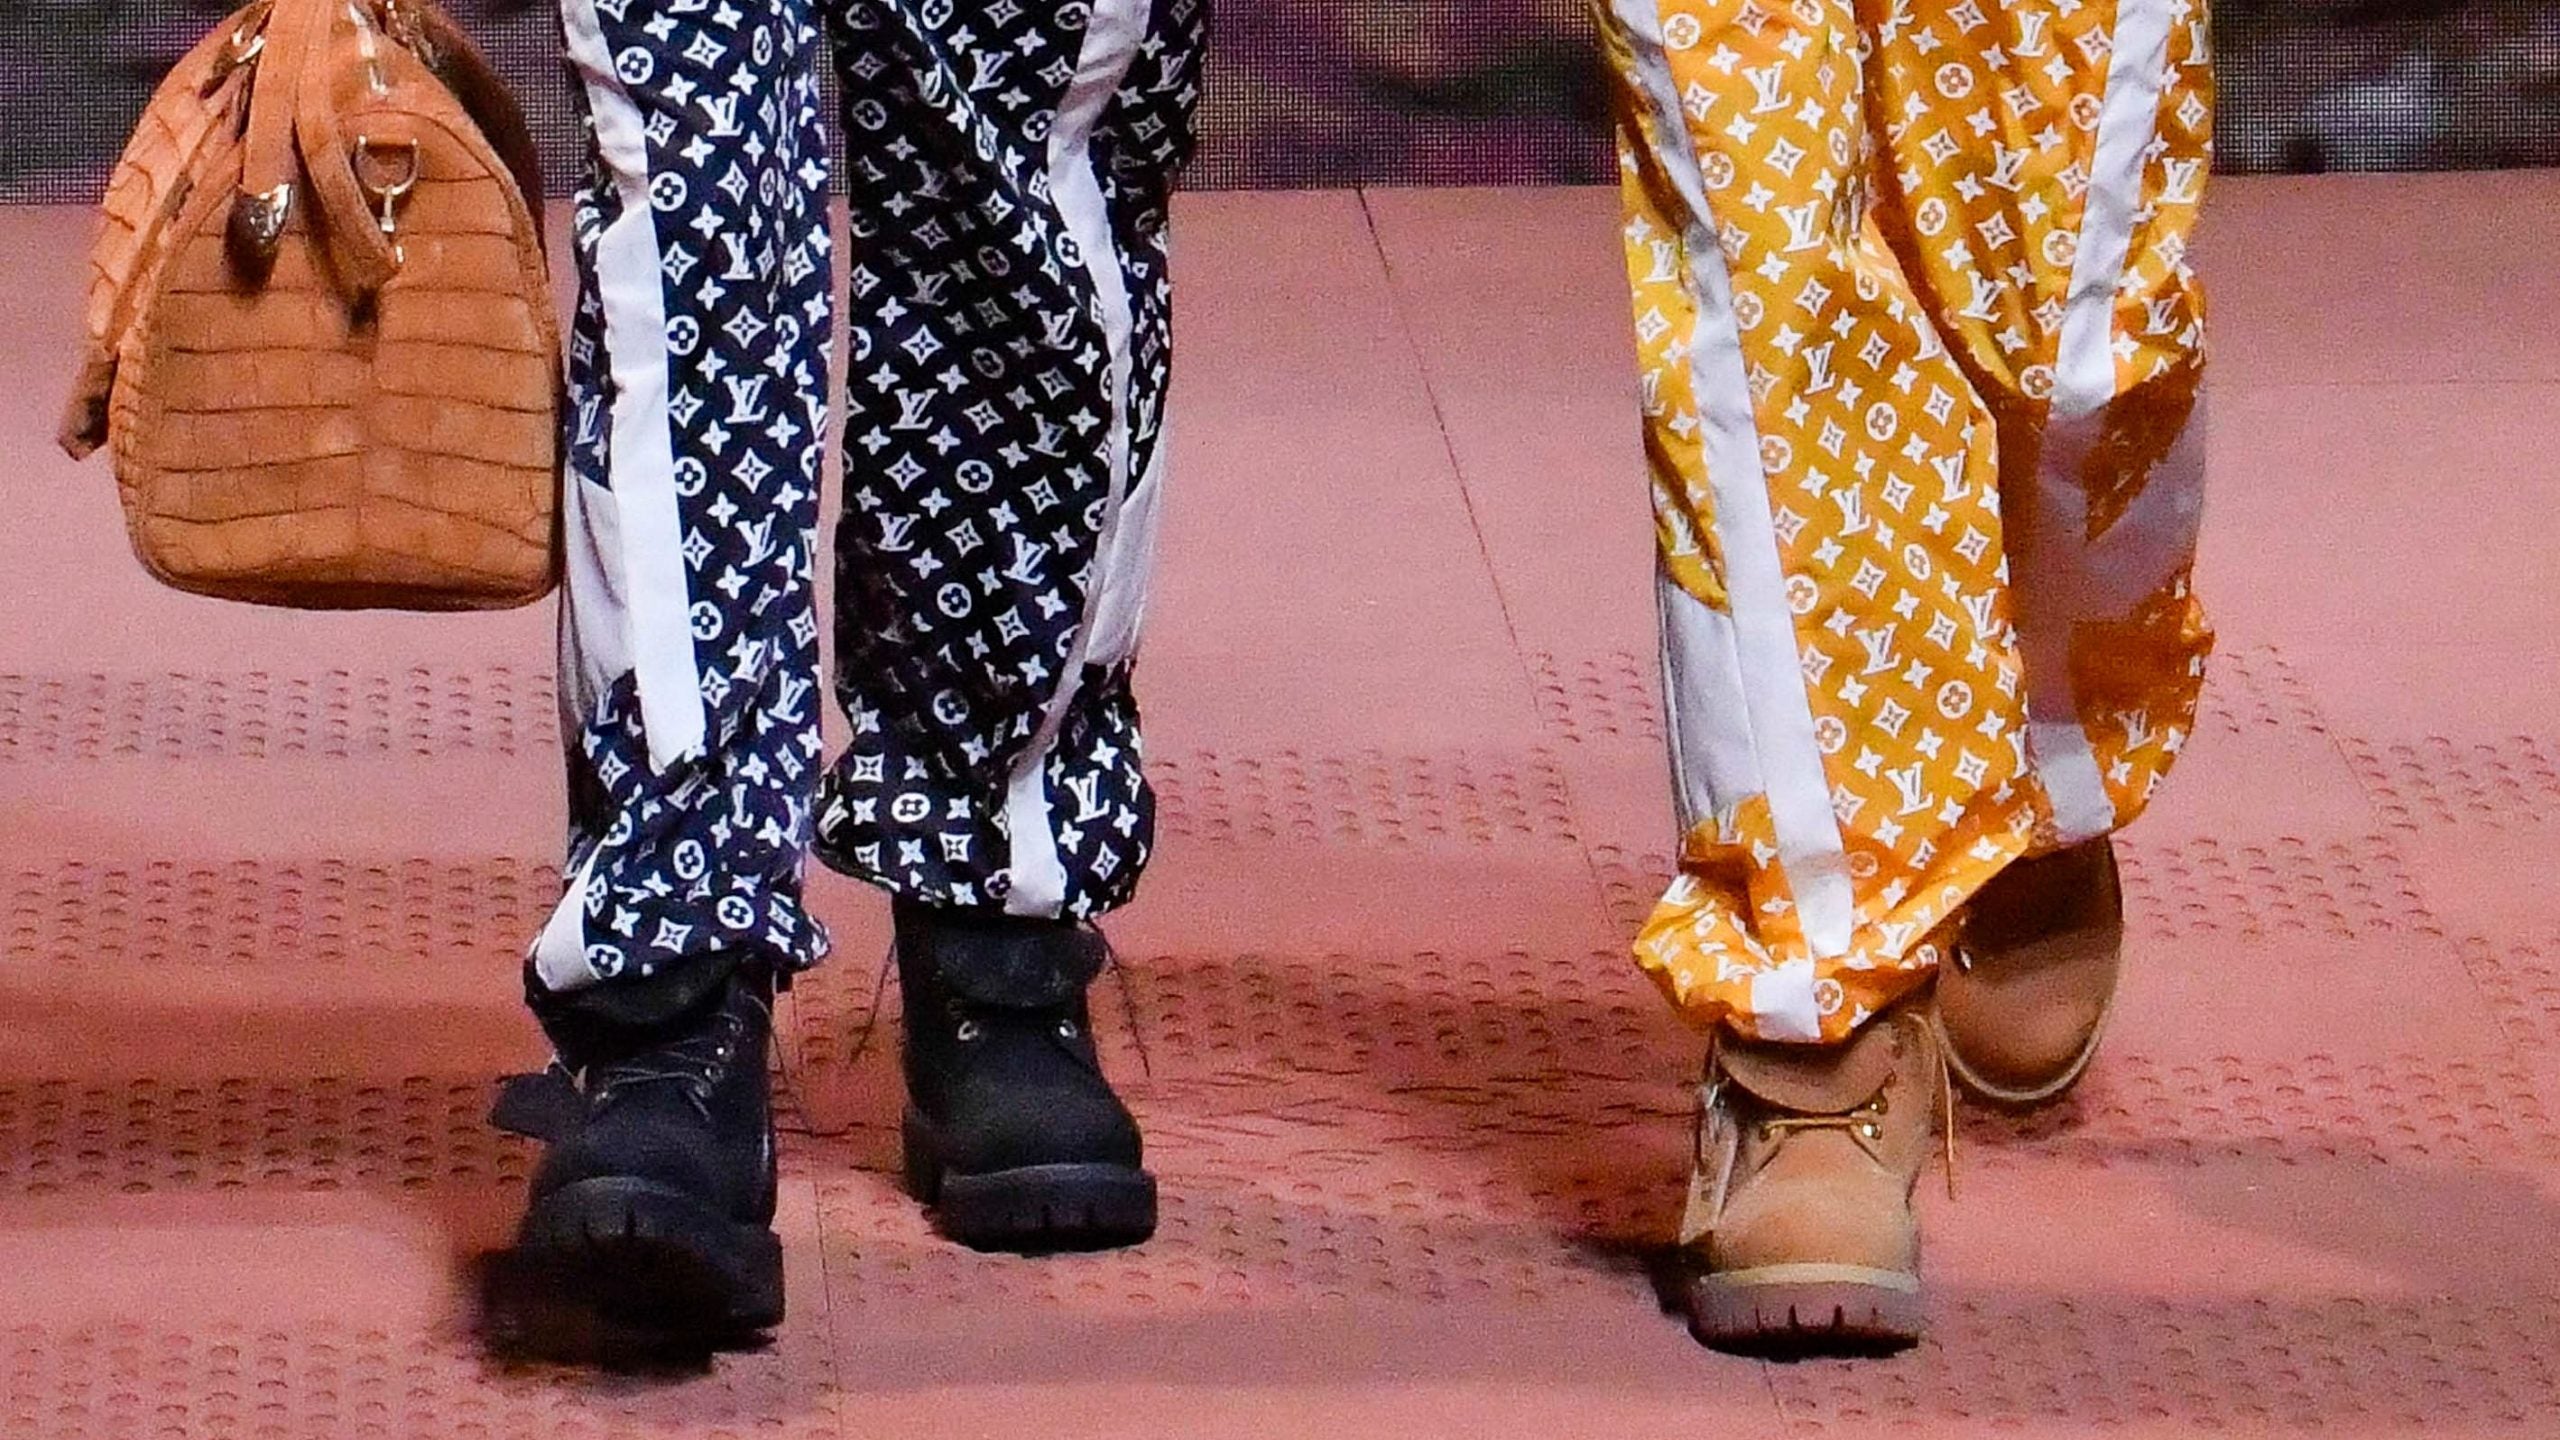 Timberland Boots Are Trending At Paris Fashion Week Men’s, Here’s Why